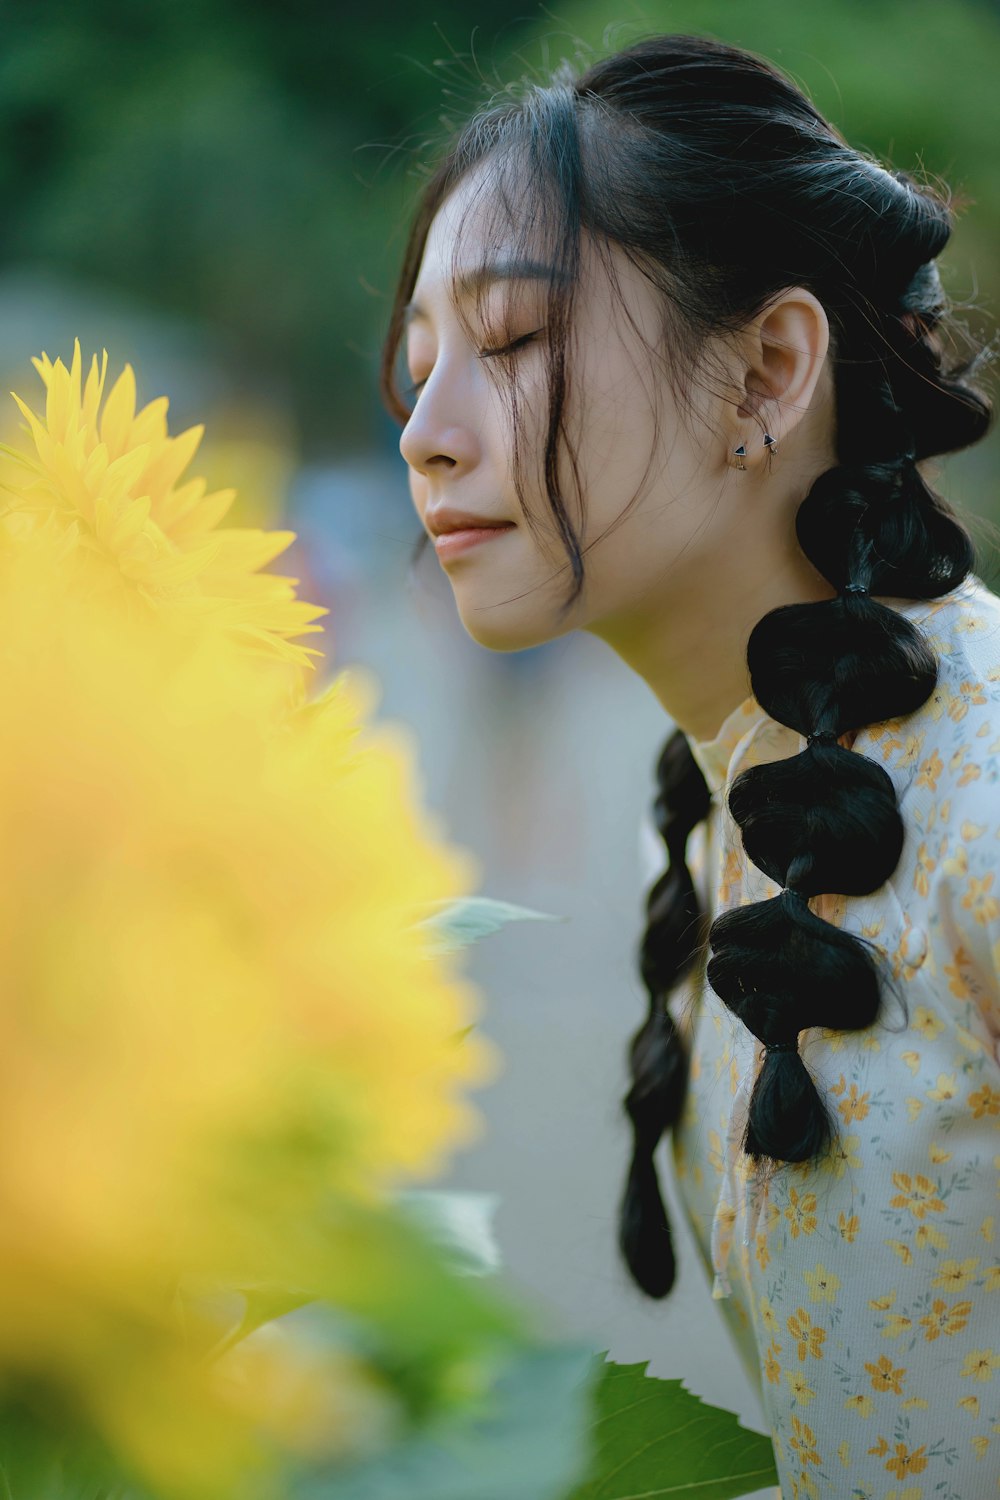 a woman with long black hair standing next to a yellow flower